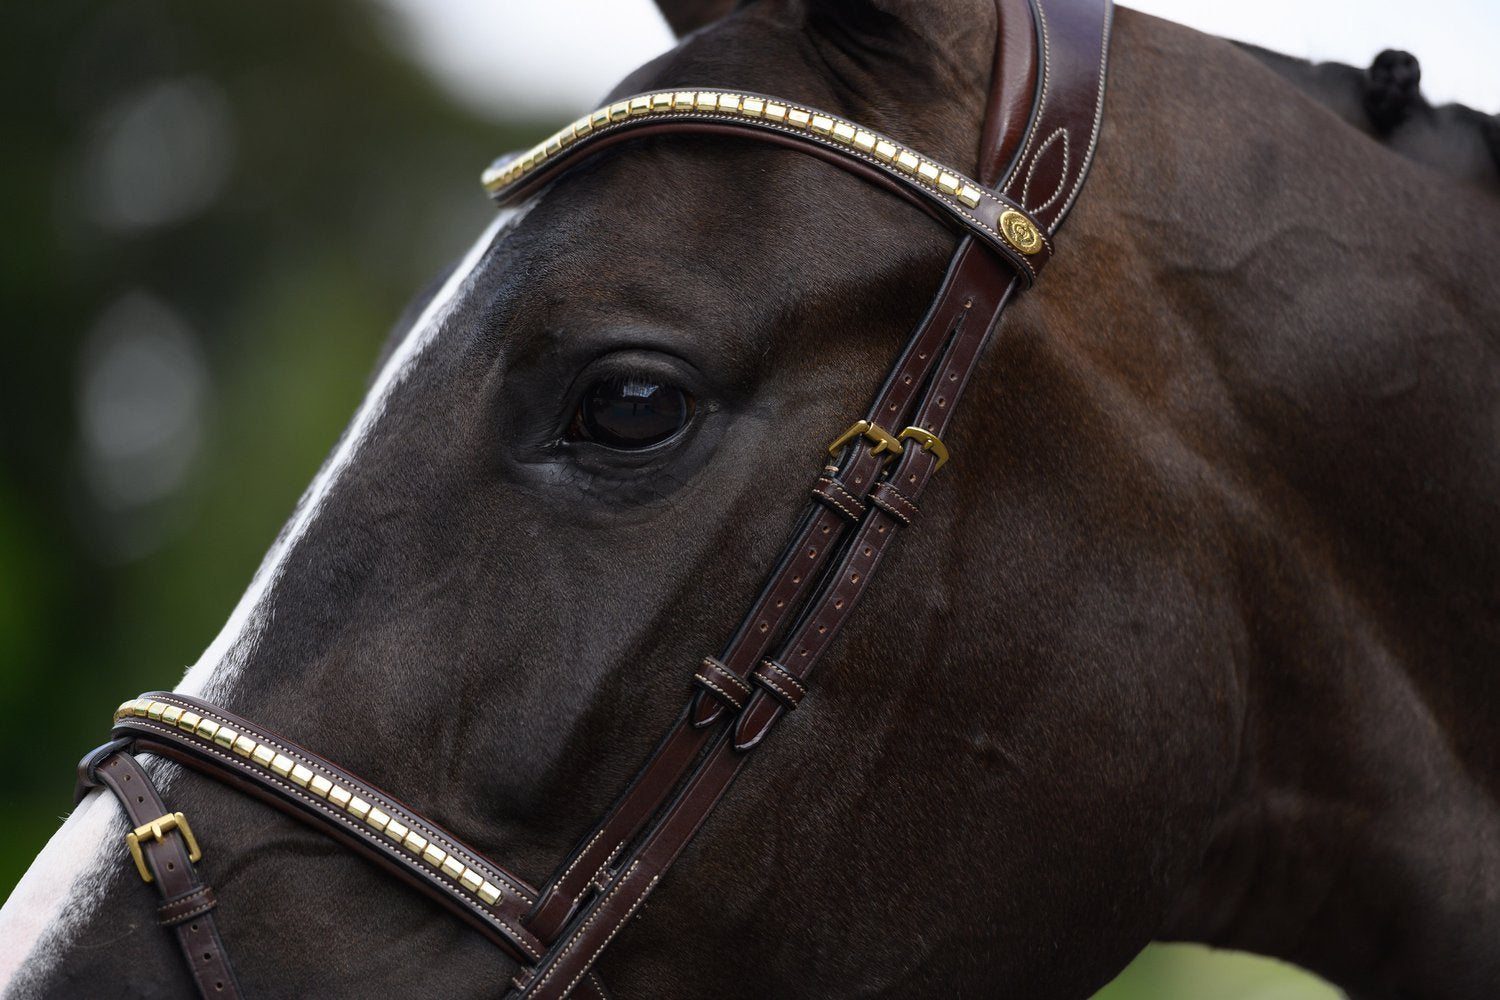 A beautiful snaffle bridle with a removable flash strap and a classical look. It is beautifully decorated with gold-colored clinchers both on the noseband and on the browband.